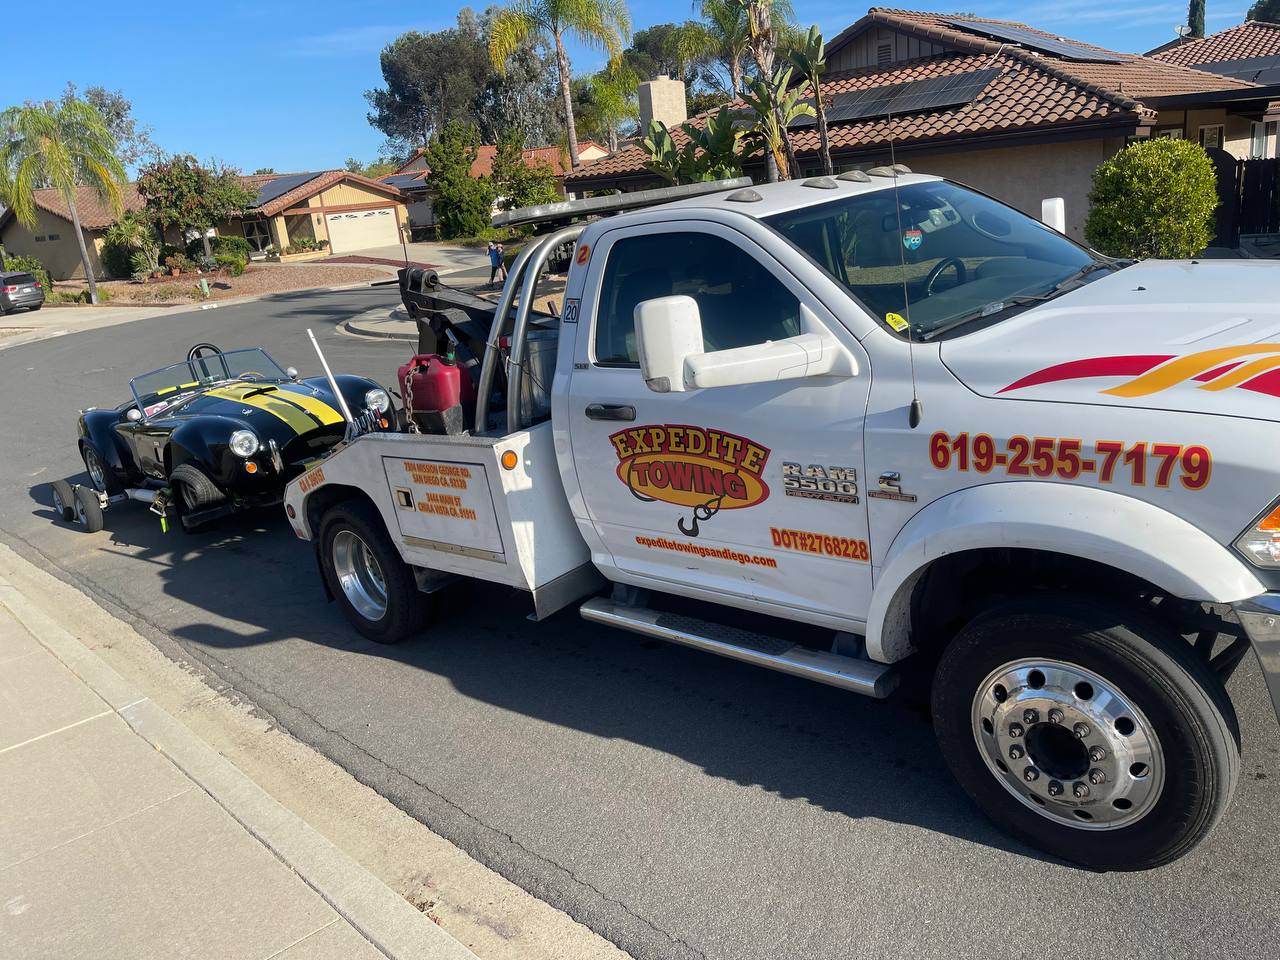 Classic Car Towing – Finding the Right Company